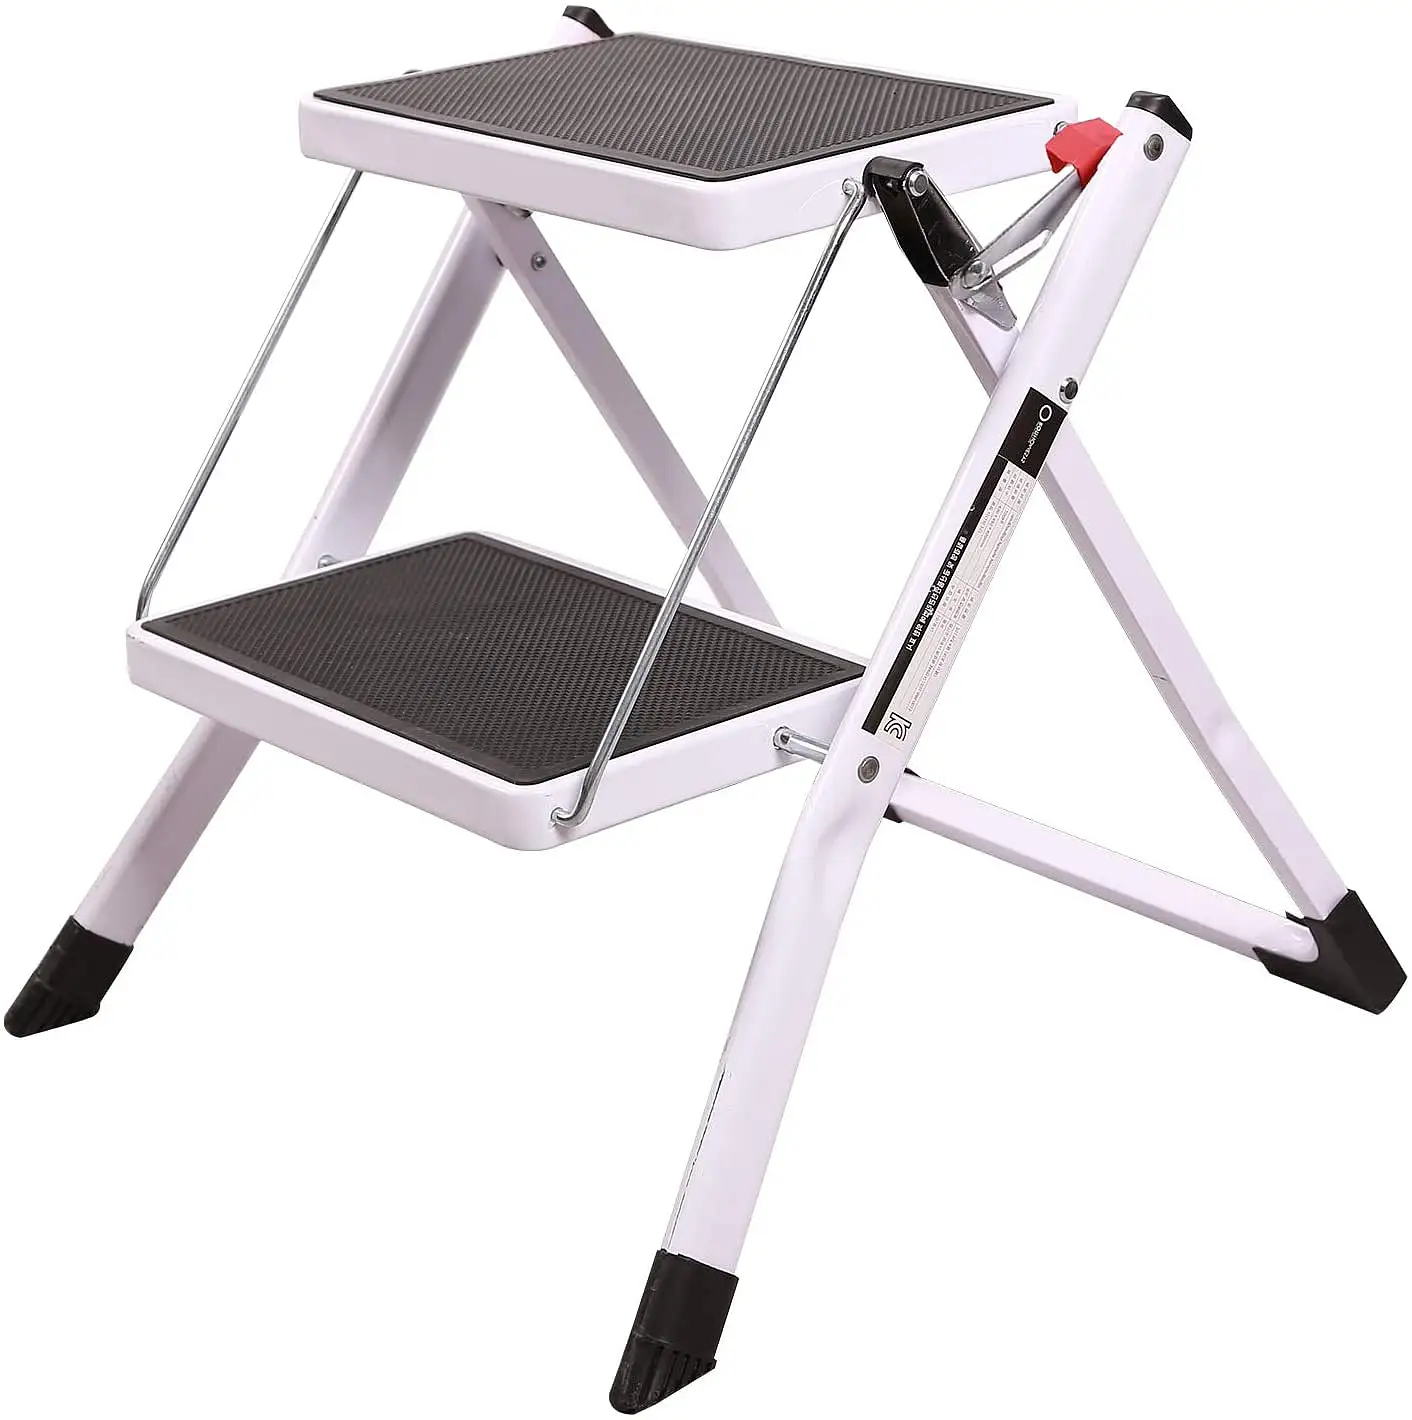 Small Step Ladder 2 Step Stool for Adults, Sturdy Heavy Duty White Folding Mini Ladder for Kitchen Closet manufacturer